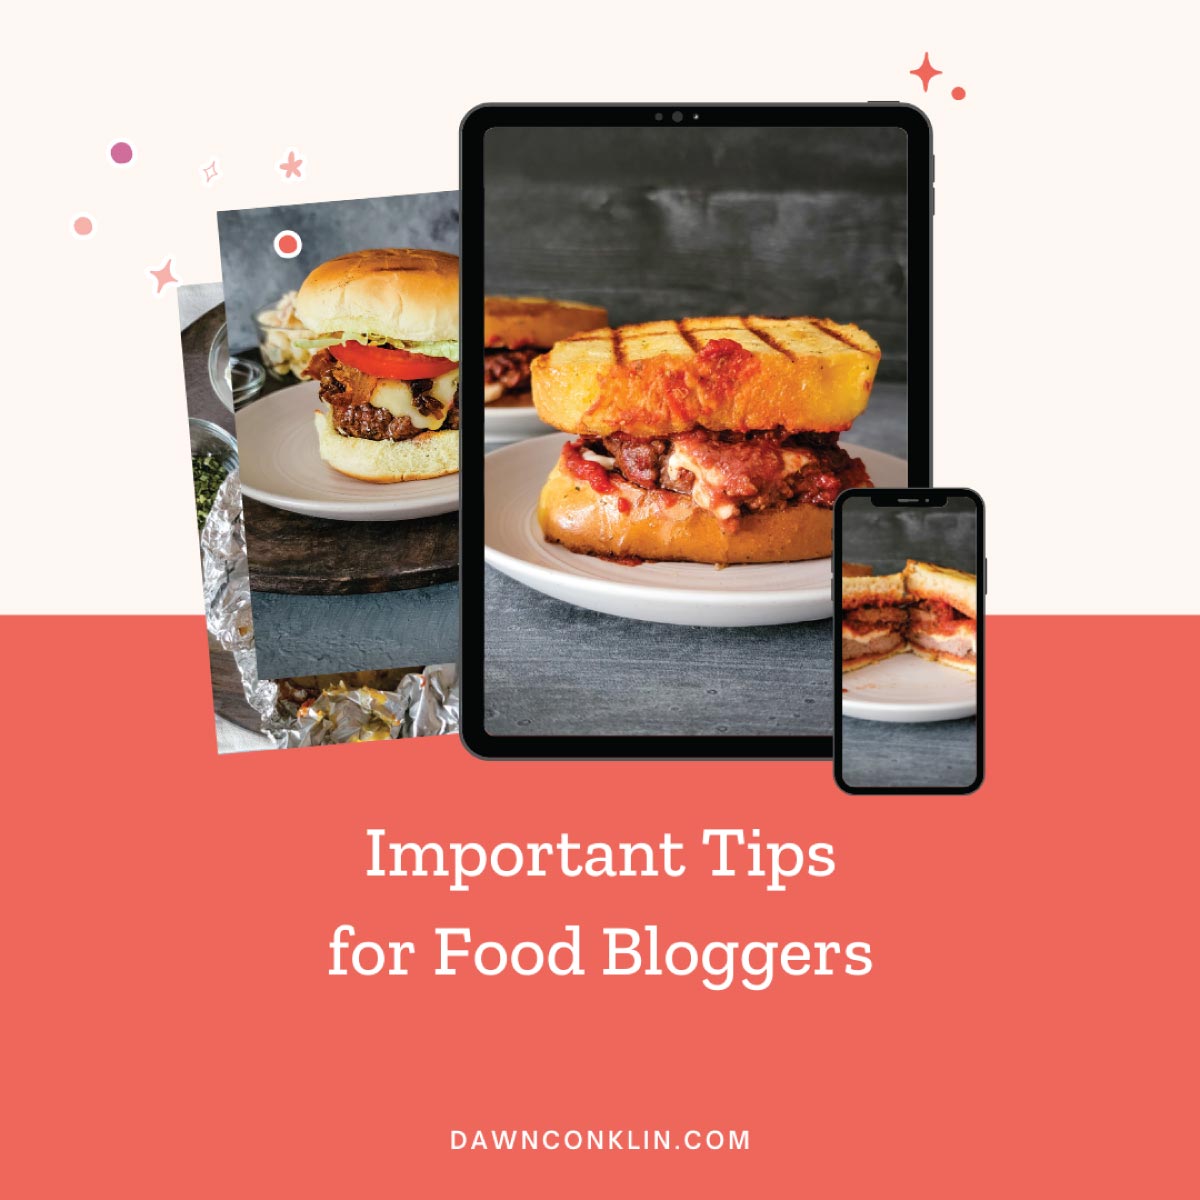 Important Tips for Food Bloggers